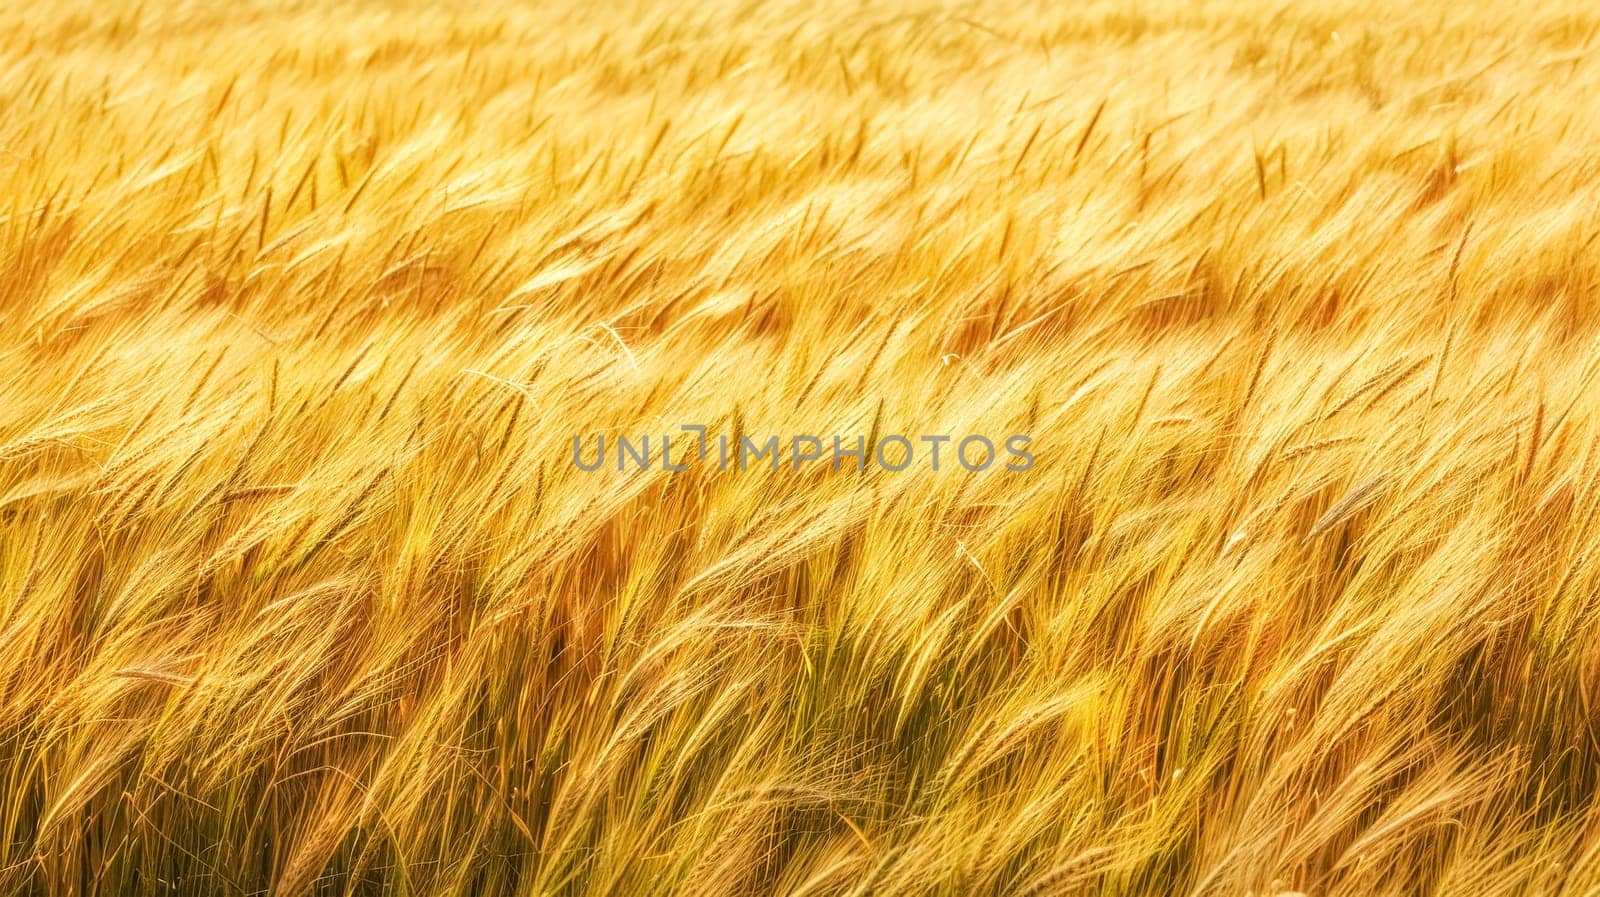 Golden wheat field at sunset by Edophoto